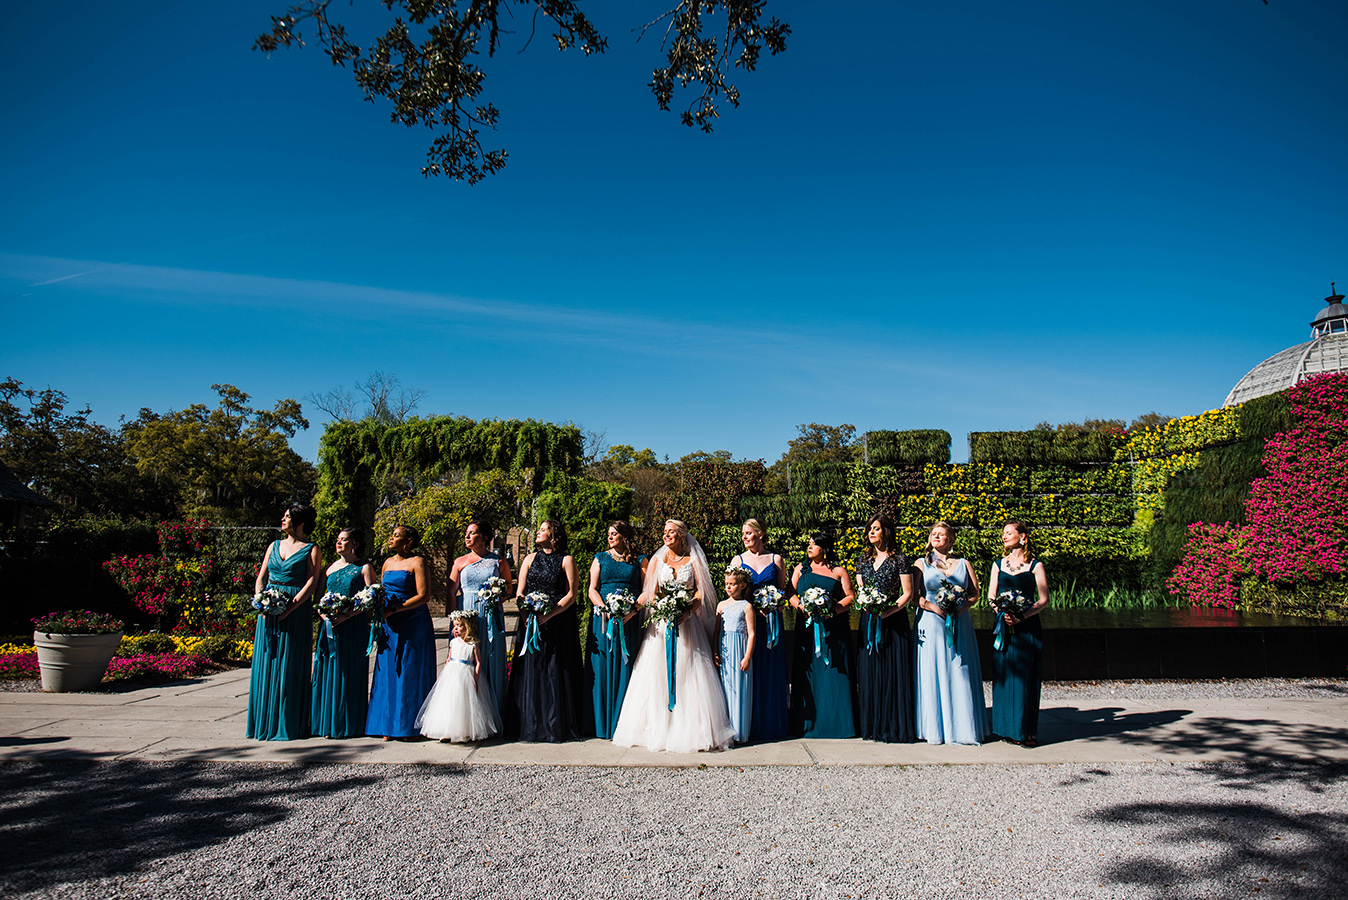 Kate provided her bridesmaids a teal and blue paint chip color palette and allowed them to each select their own gowns. “It blended great!” she shares of the resulting looks.